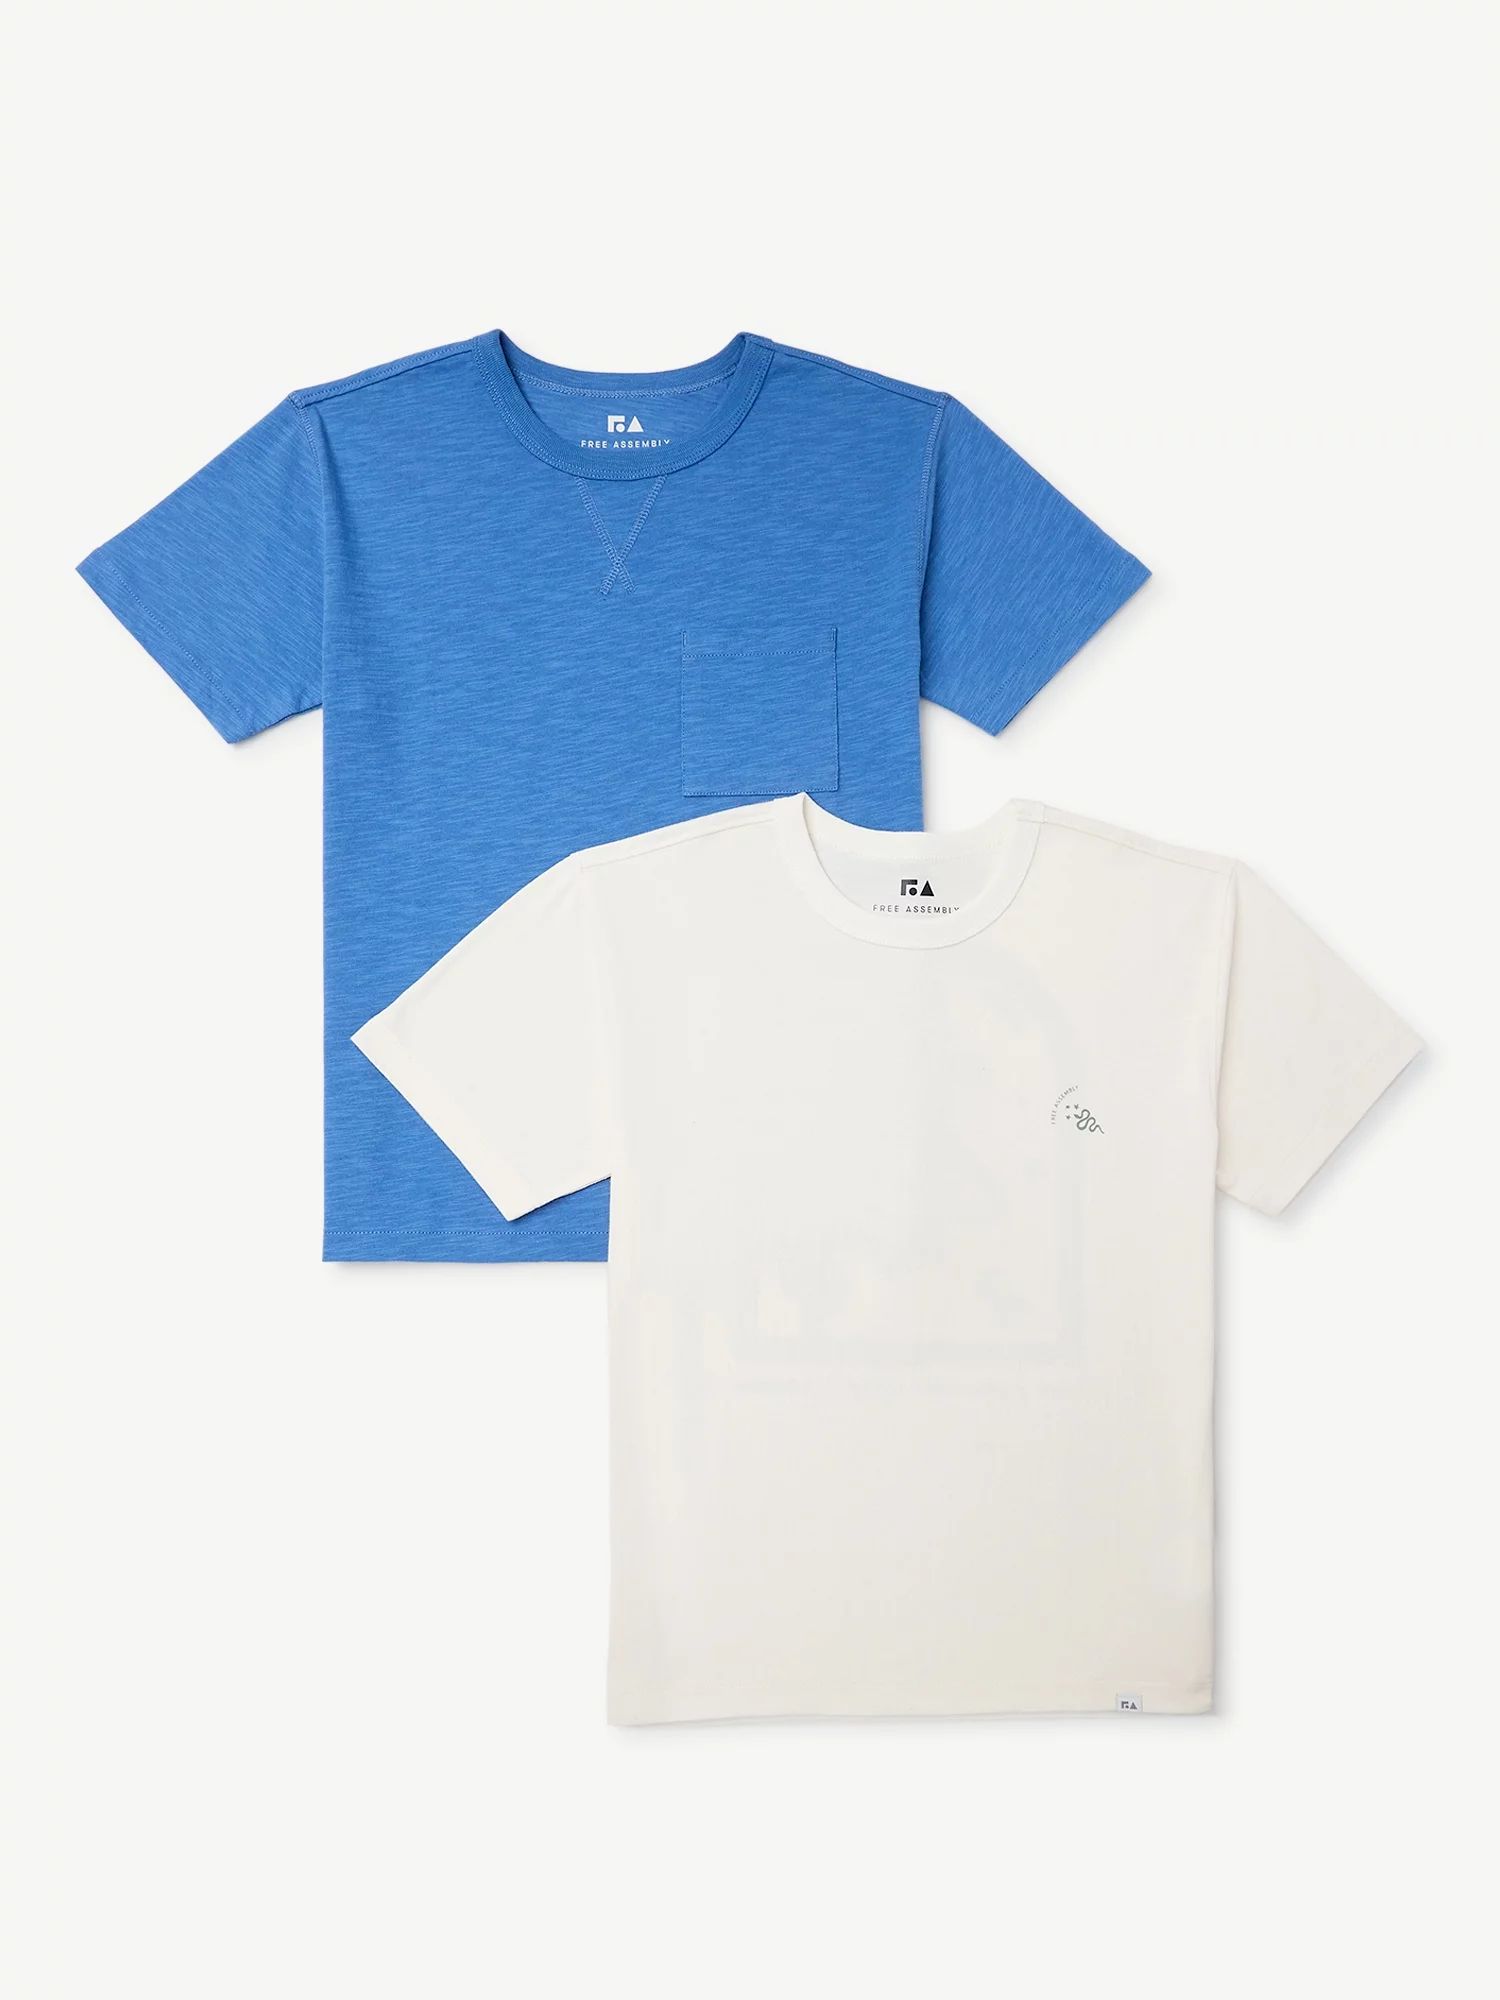 Free Assembly Boys 2-Pack Garment Washed Graphic T-Shirts, Sizes 4-18 | Walmart (US)